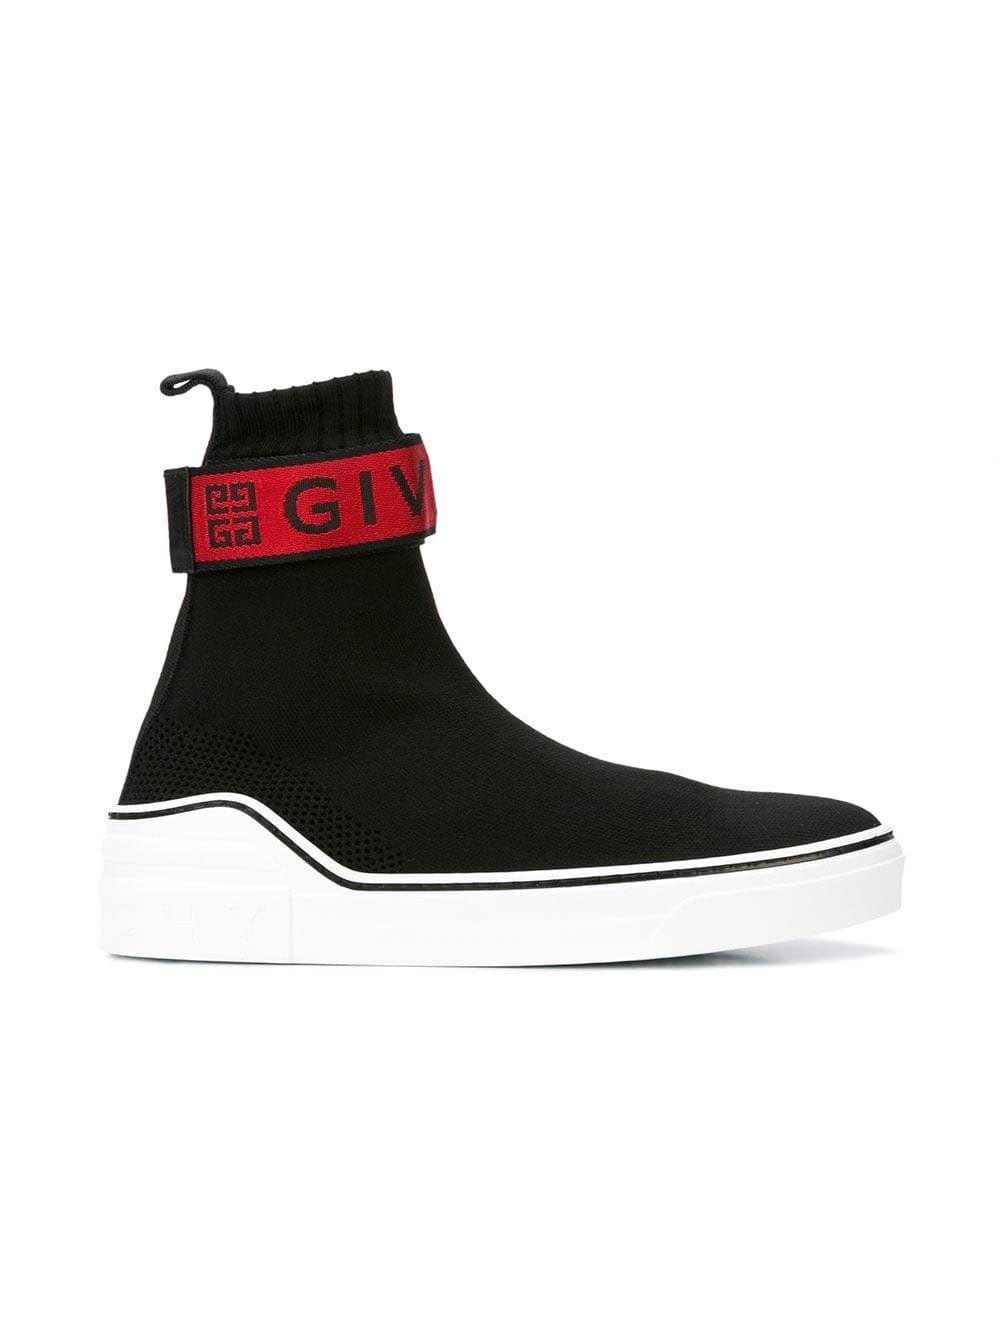 Lyst - Givenchy George V Sock Sneakers in Black for Men